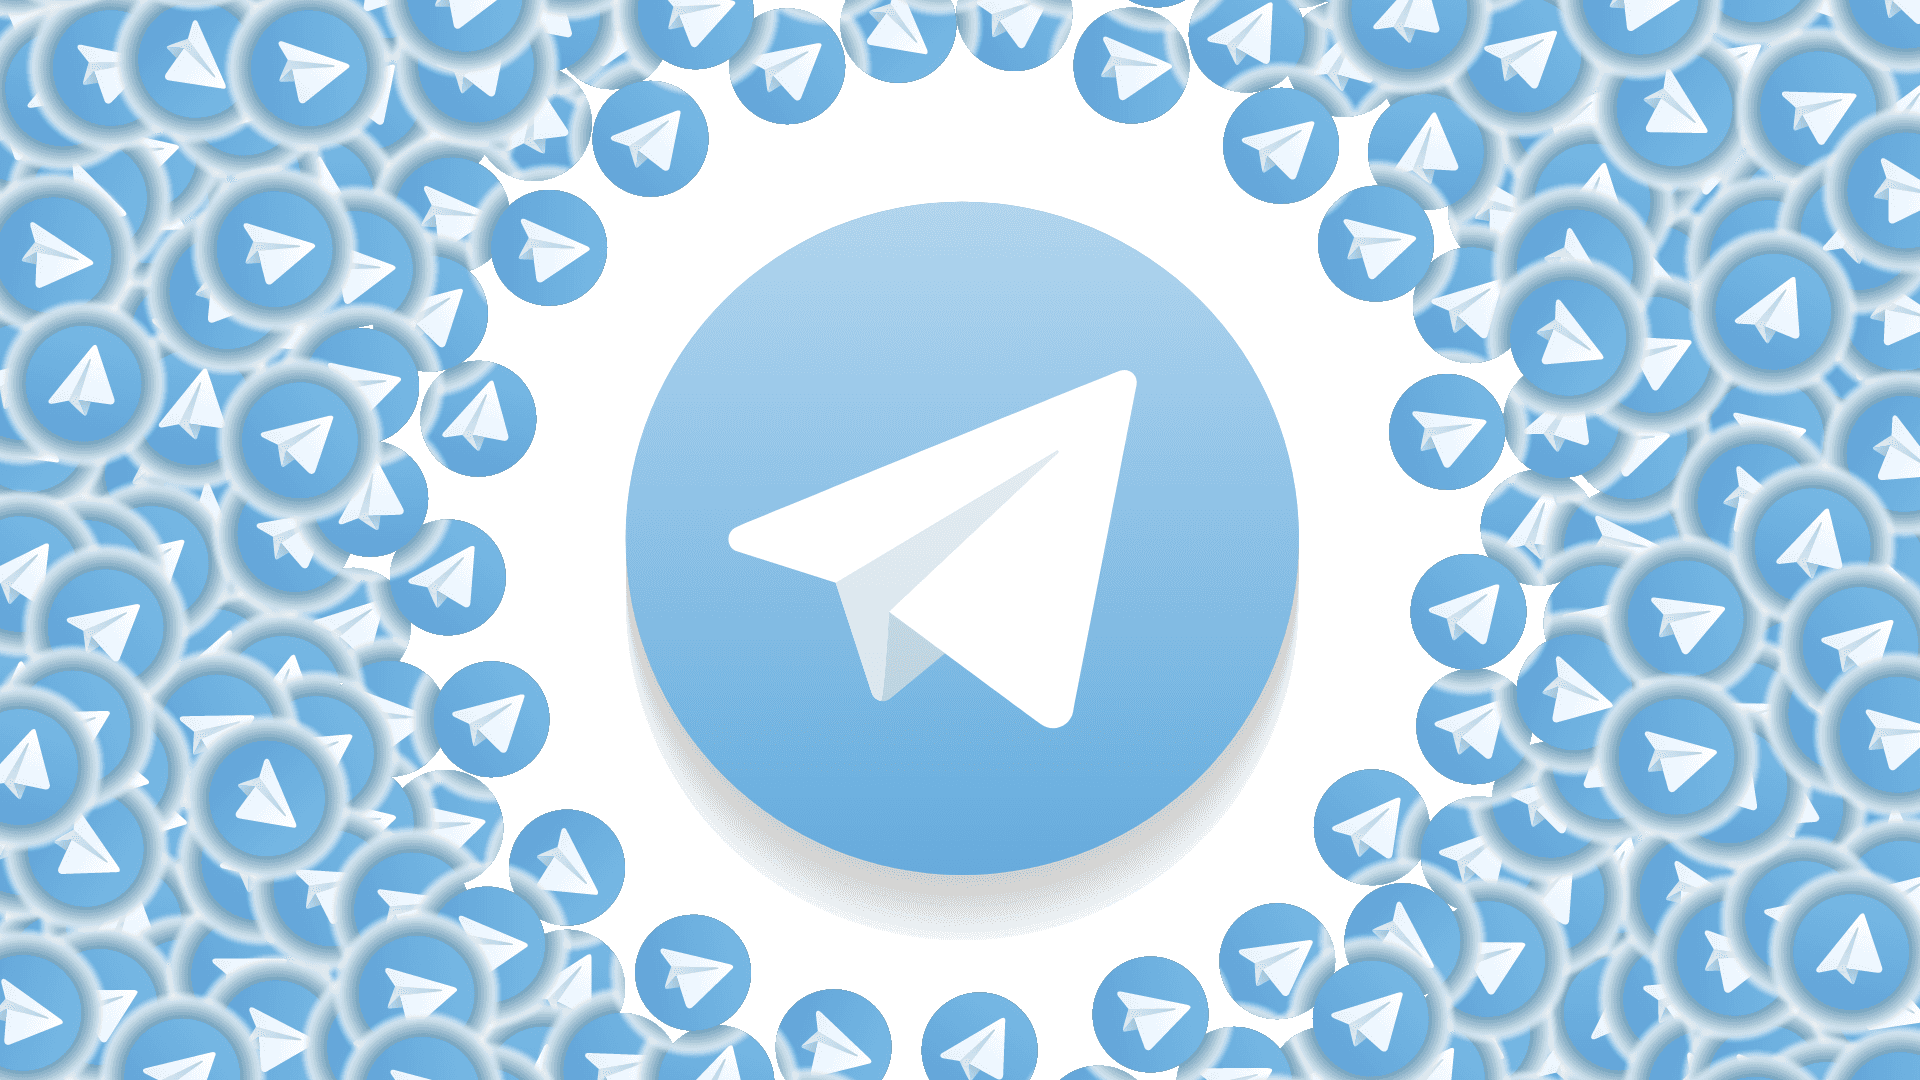 A Blue Telegram Logo Surrounded By Blue Circles